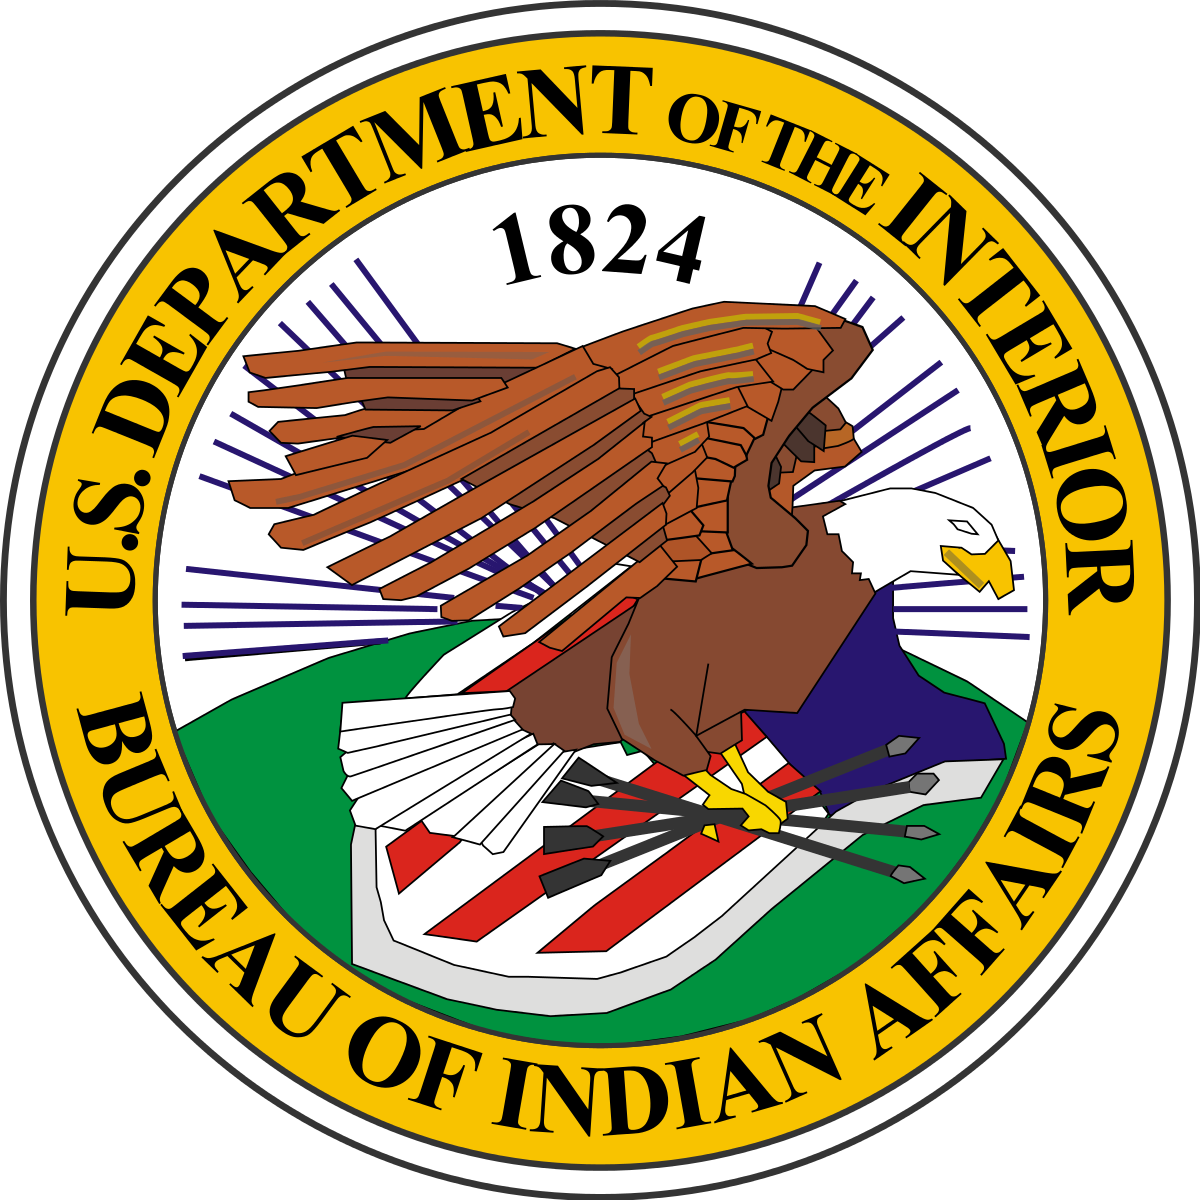 Emblem with circular text, "U.S. Department of the Interior, Bureau of Indian Affairs" around illustration with 1824 and an eagle carrying arrows over a red and white striped shield on a green field 